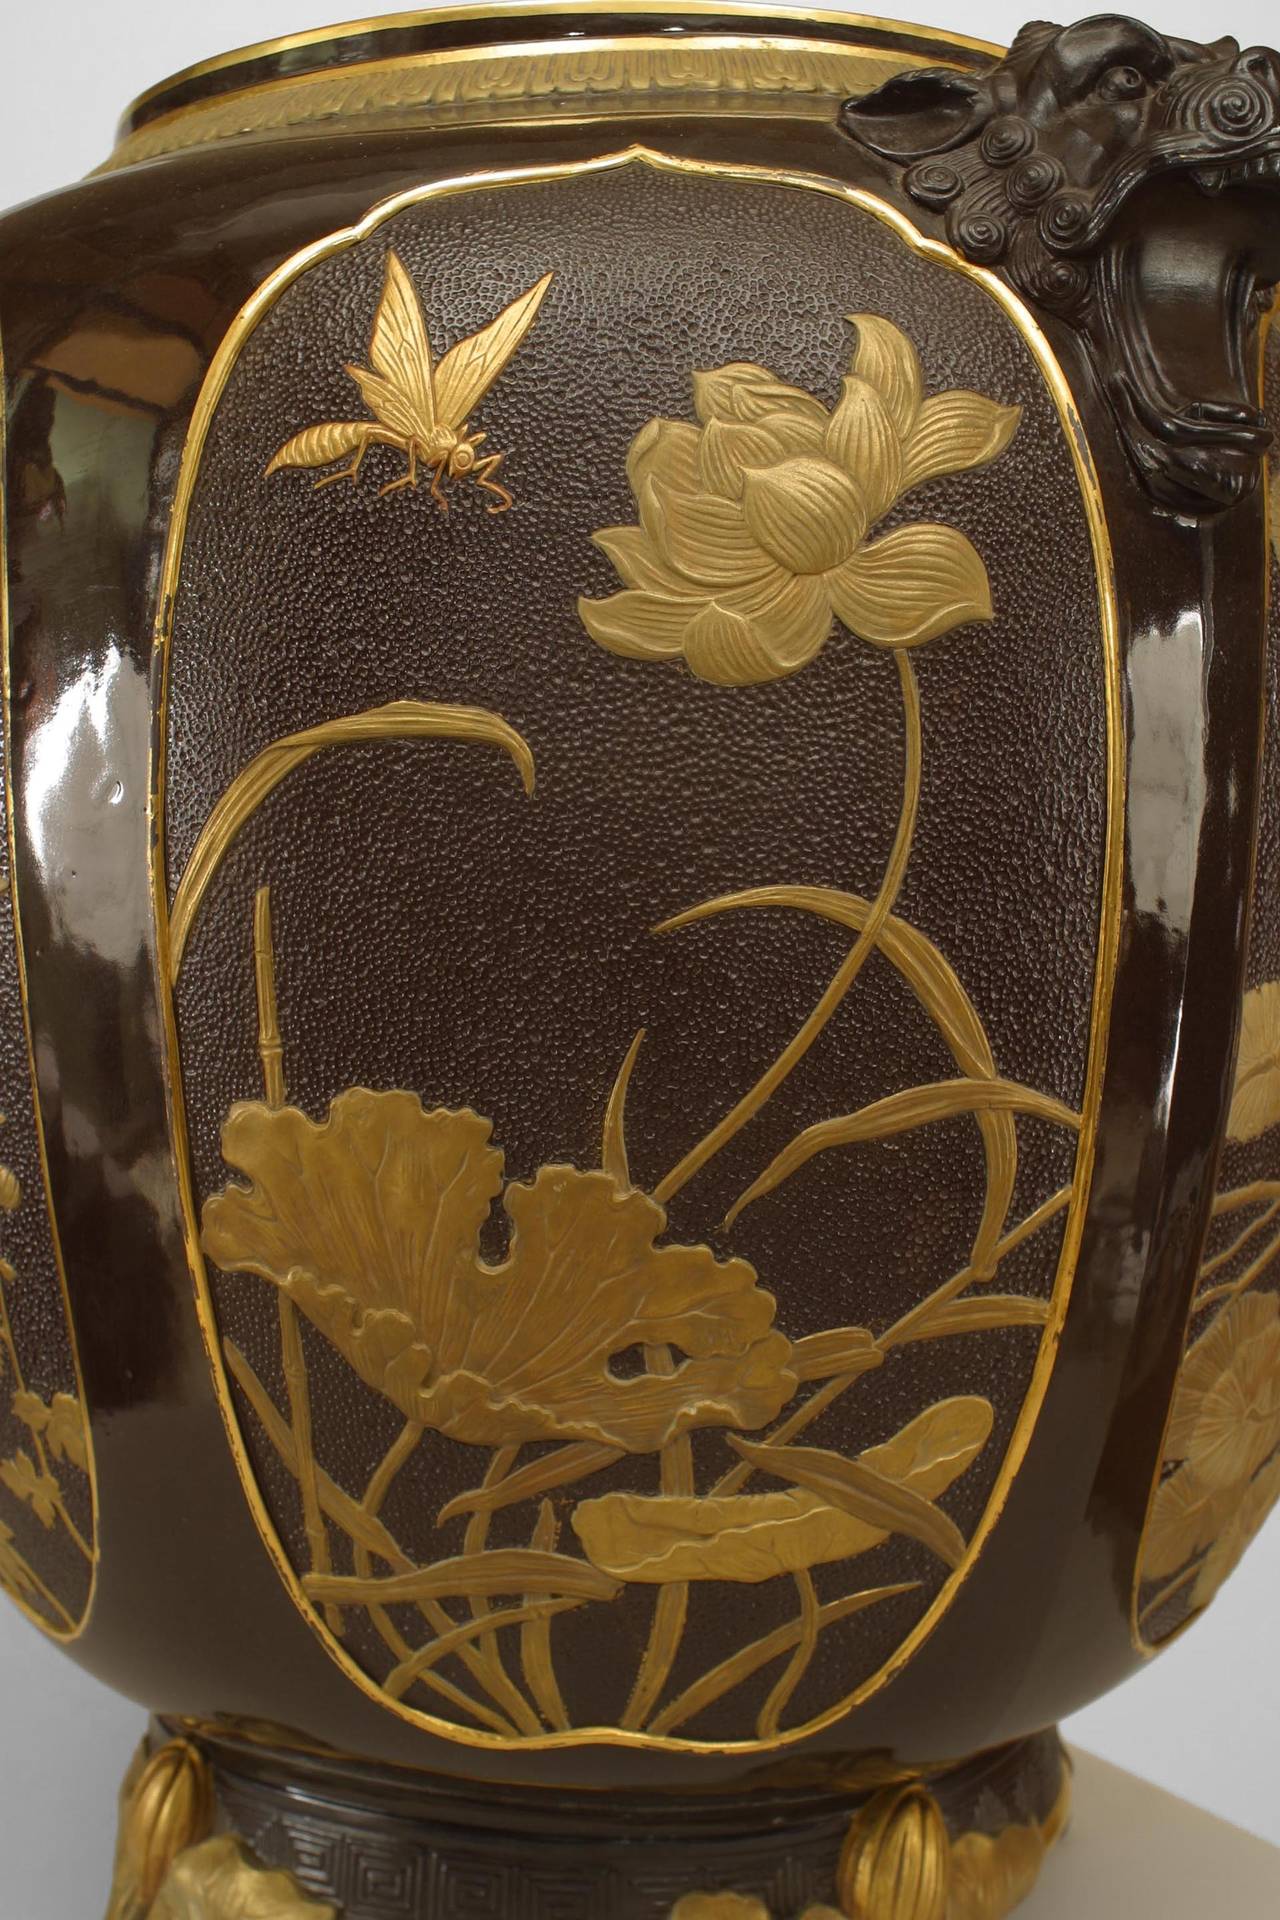 19th Century English Chinoiserie Porcelain Jardiniere by Minton 2